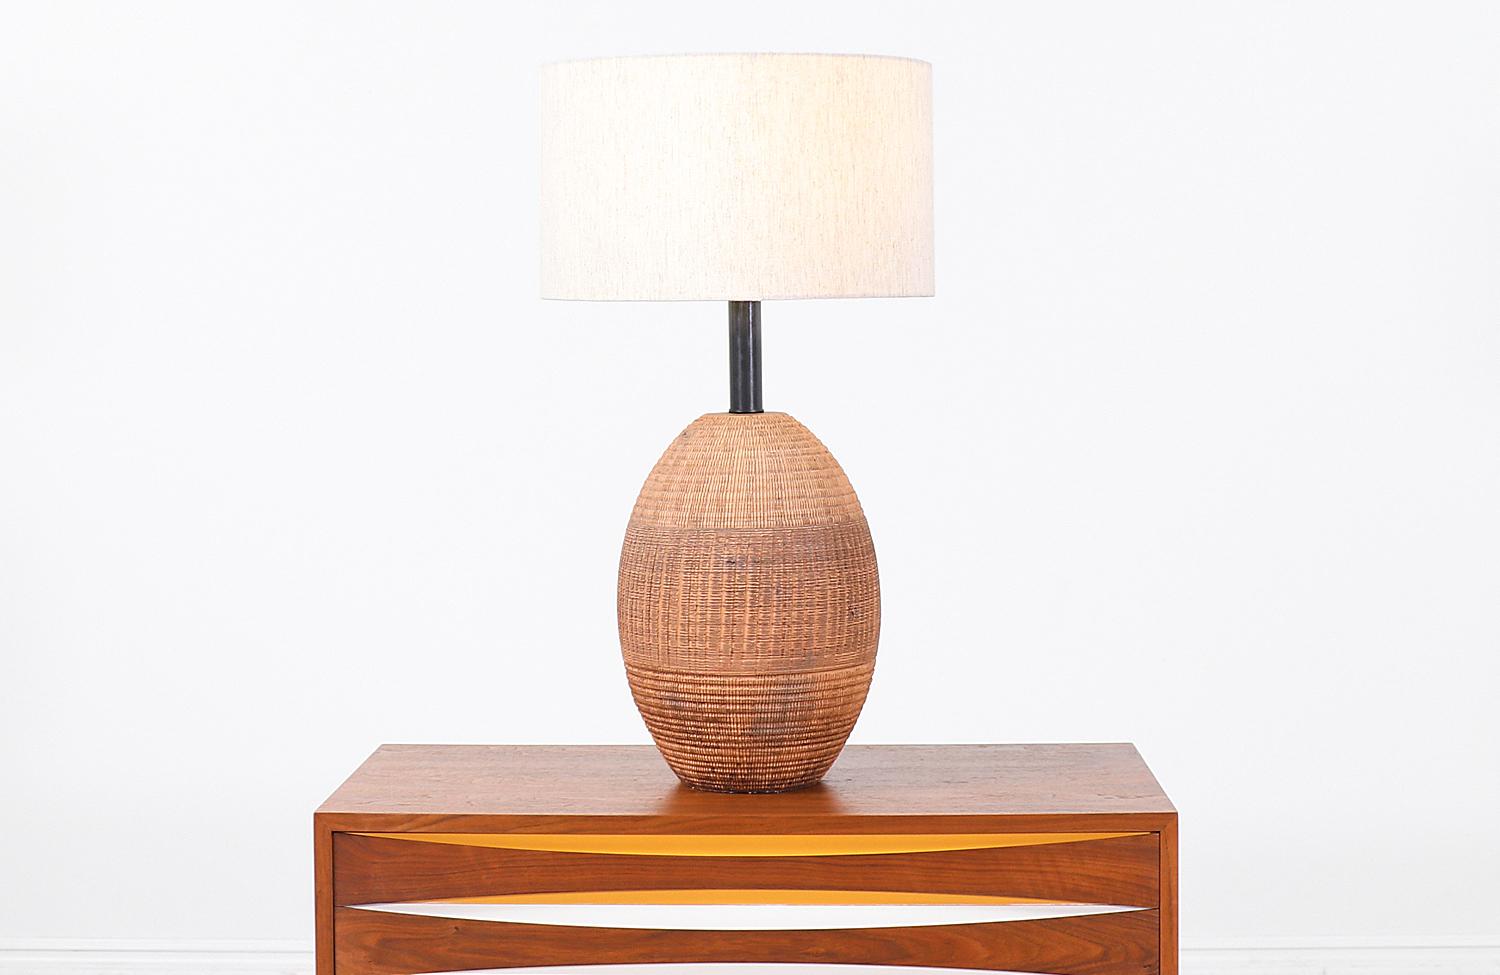 Stylish Italian modern table lamp designed and manufactured by Raymor in Italy circa 1960s. This beautifully textured lamp features a curved ceramic body with an intricate line pattern creating a wonderfully clean, asymmetric look to this textured